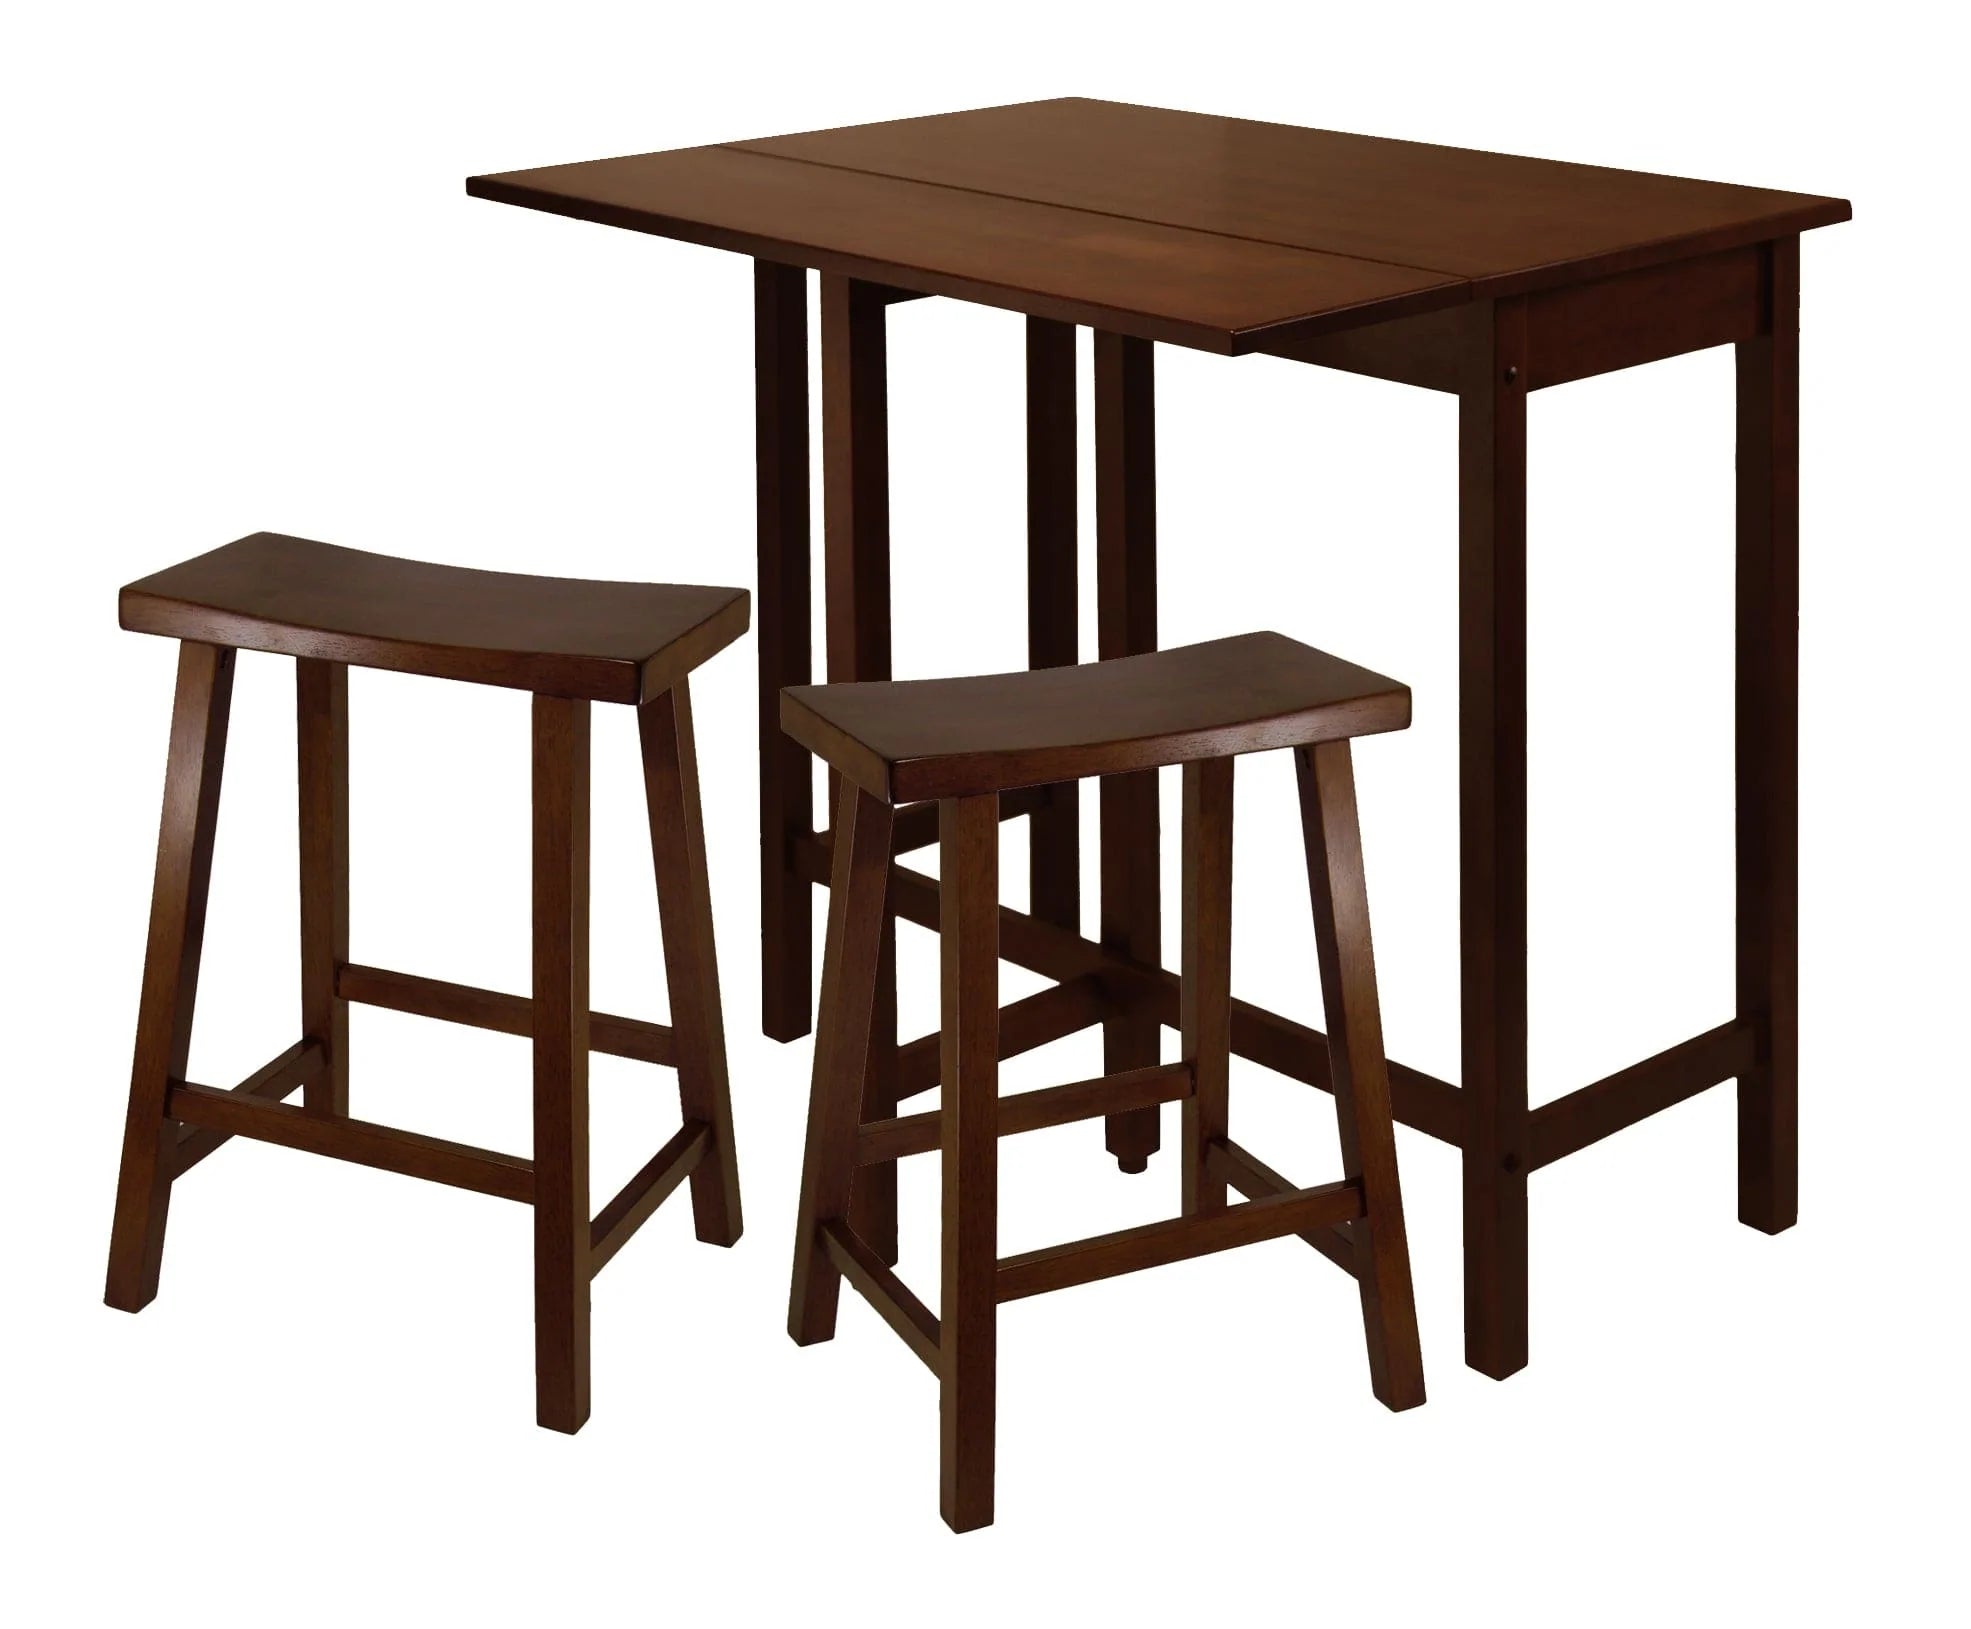 Lynnwood 3-Pc Drop Leaf Table with Saddle Seat Counter Stools, Walnut